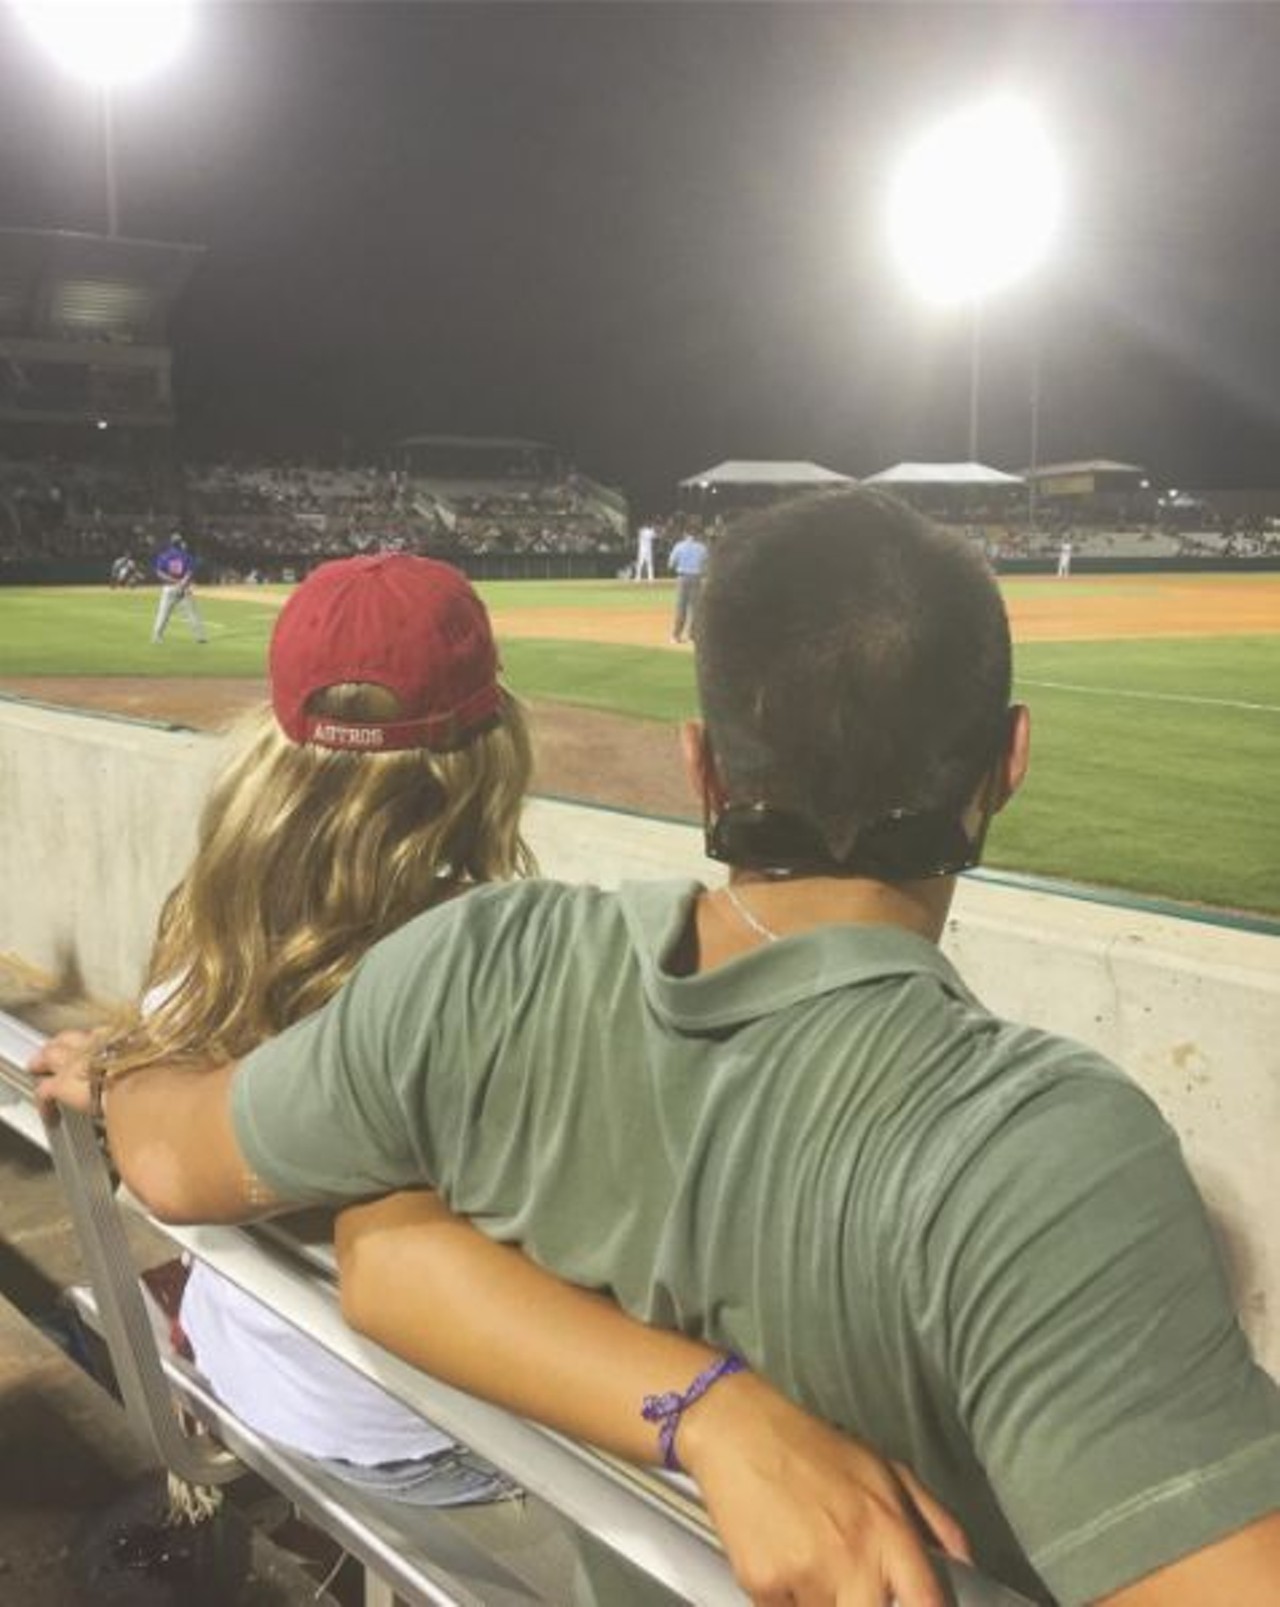 Catch a fly ball at a Missions game
5757 U.S. Hwy 90 W, milb.com
So you can score a home run, too.
Photo via Instagram, joanna_kat